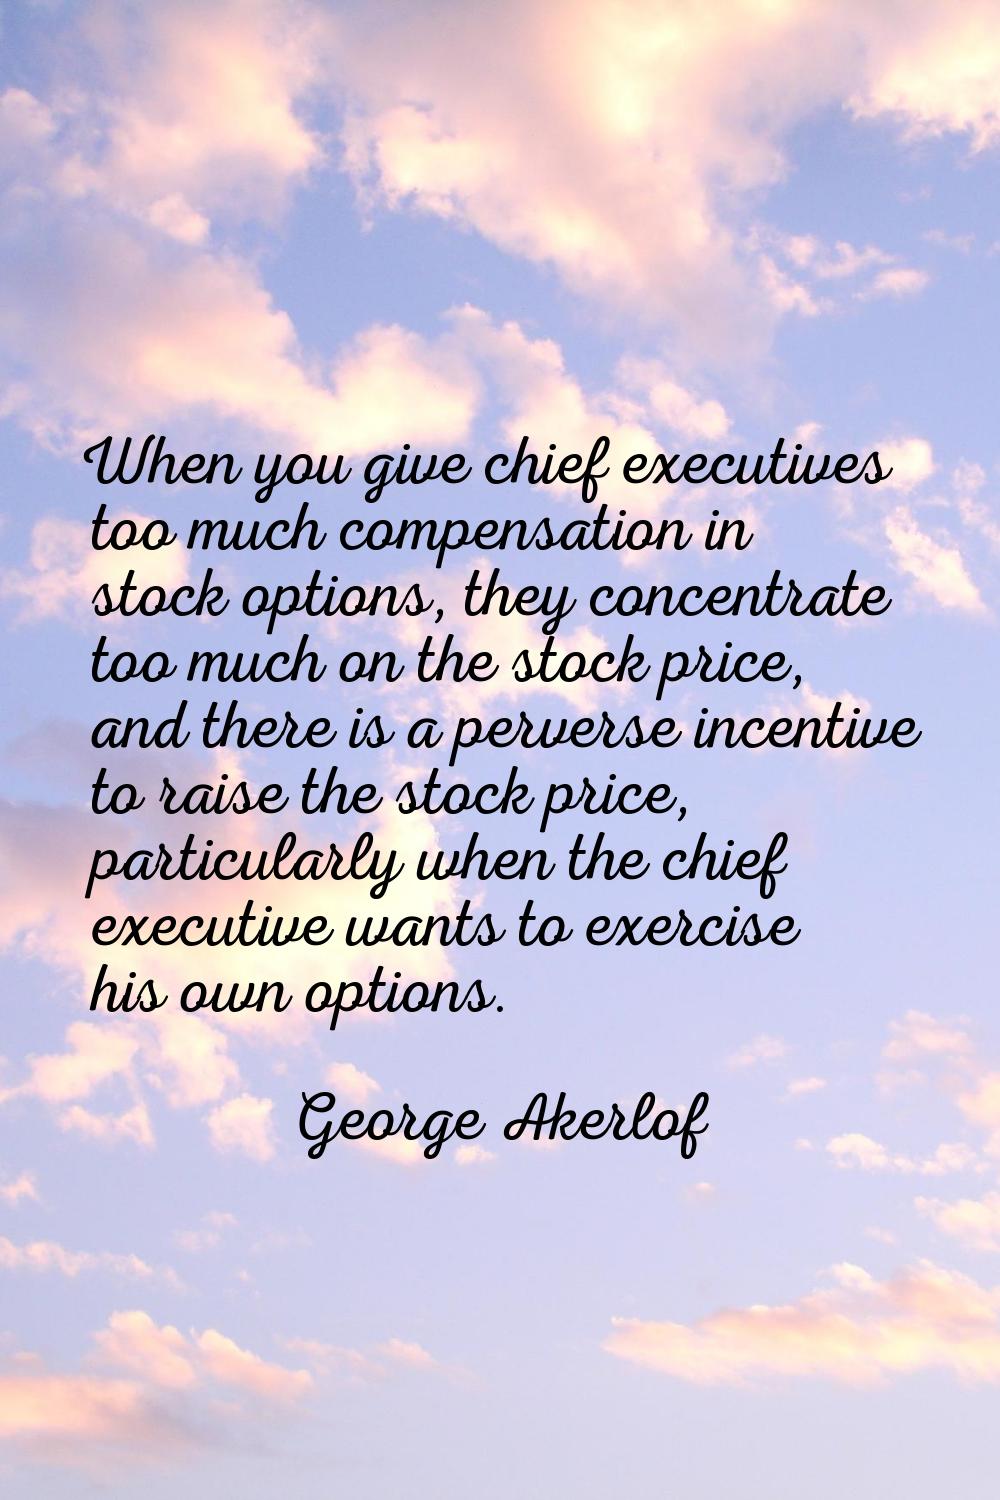 When you give chief executives too much compensation in stock options, they concentrate too much on